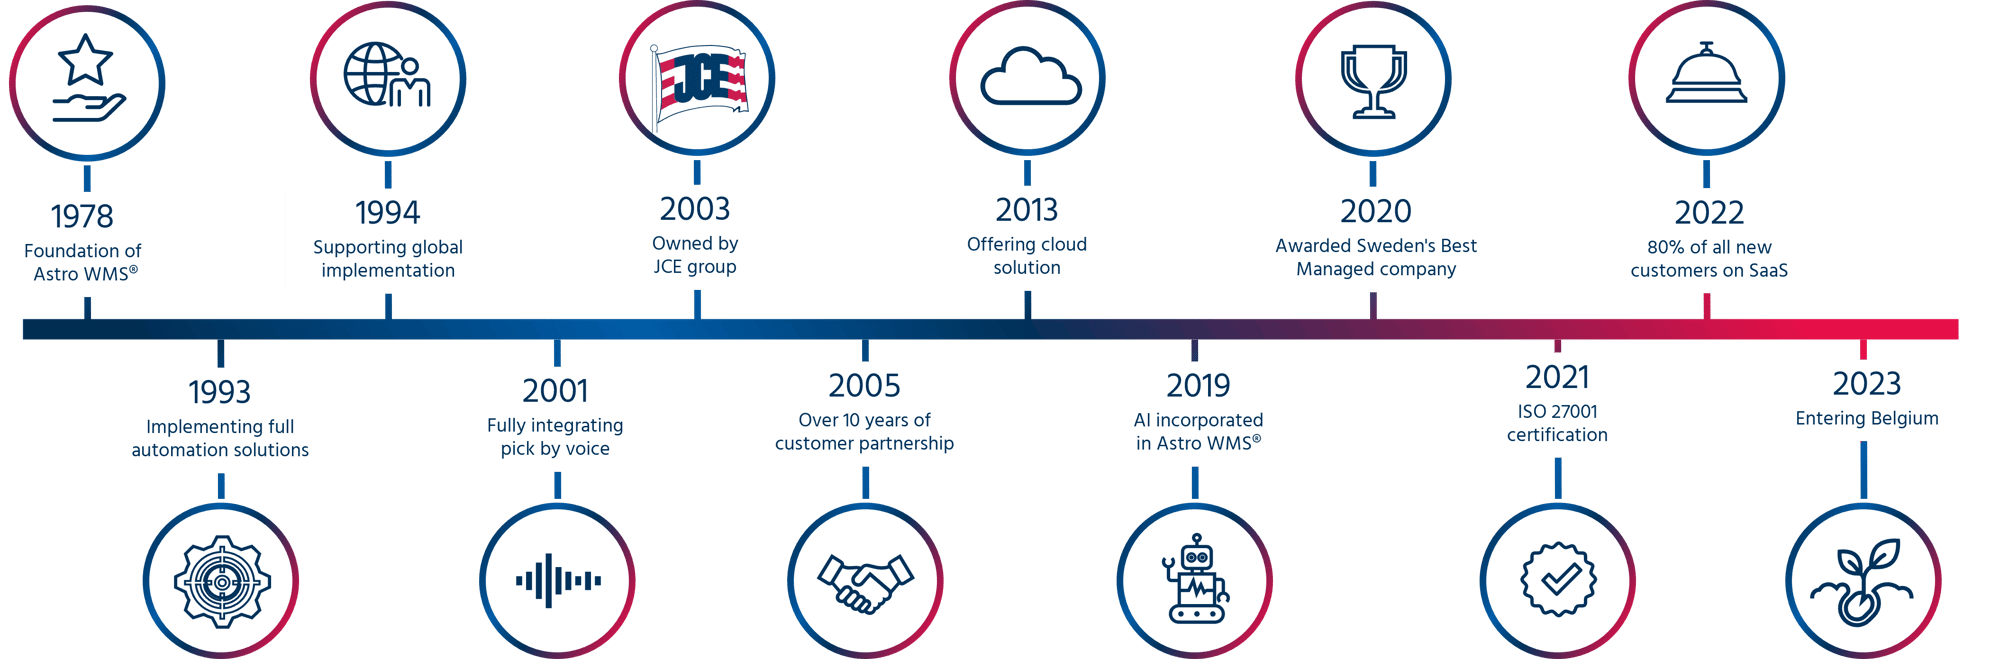 History graph with milestones in the history of Consafe Logistics